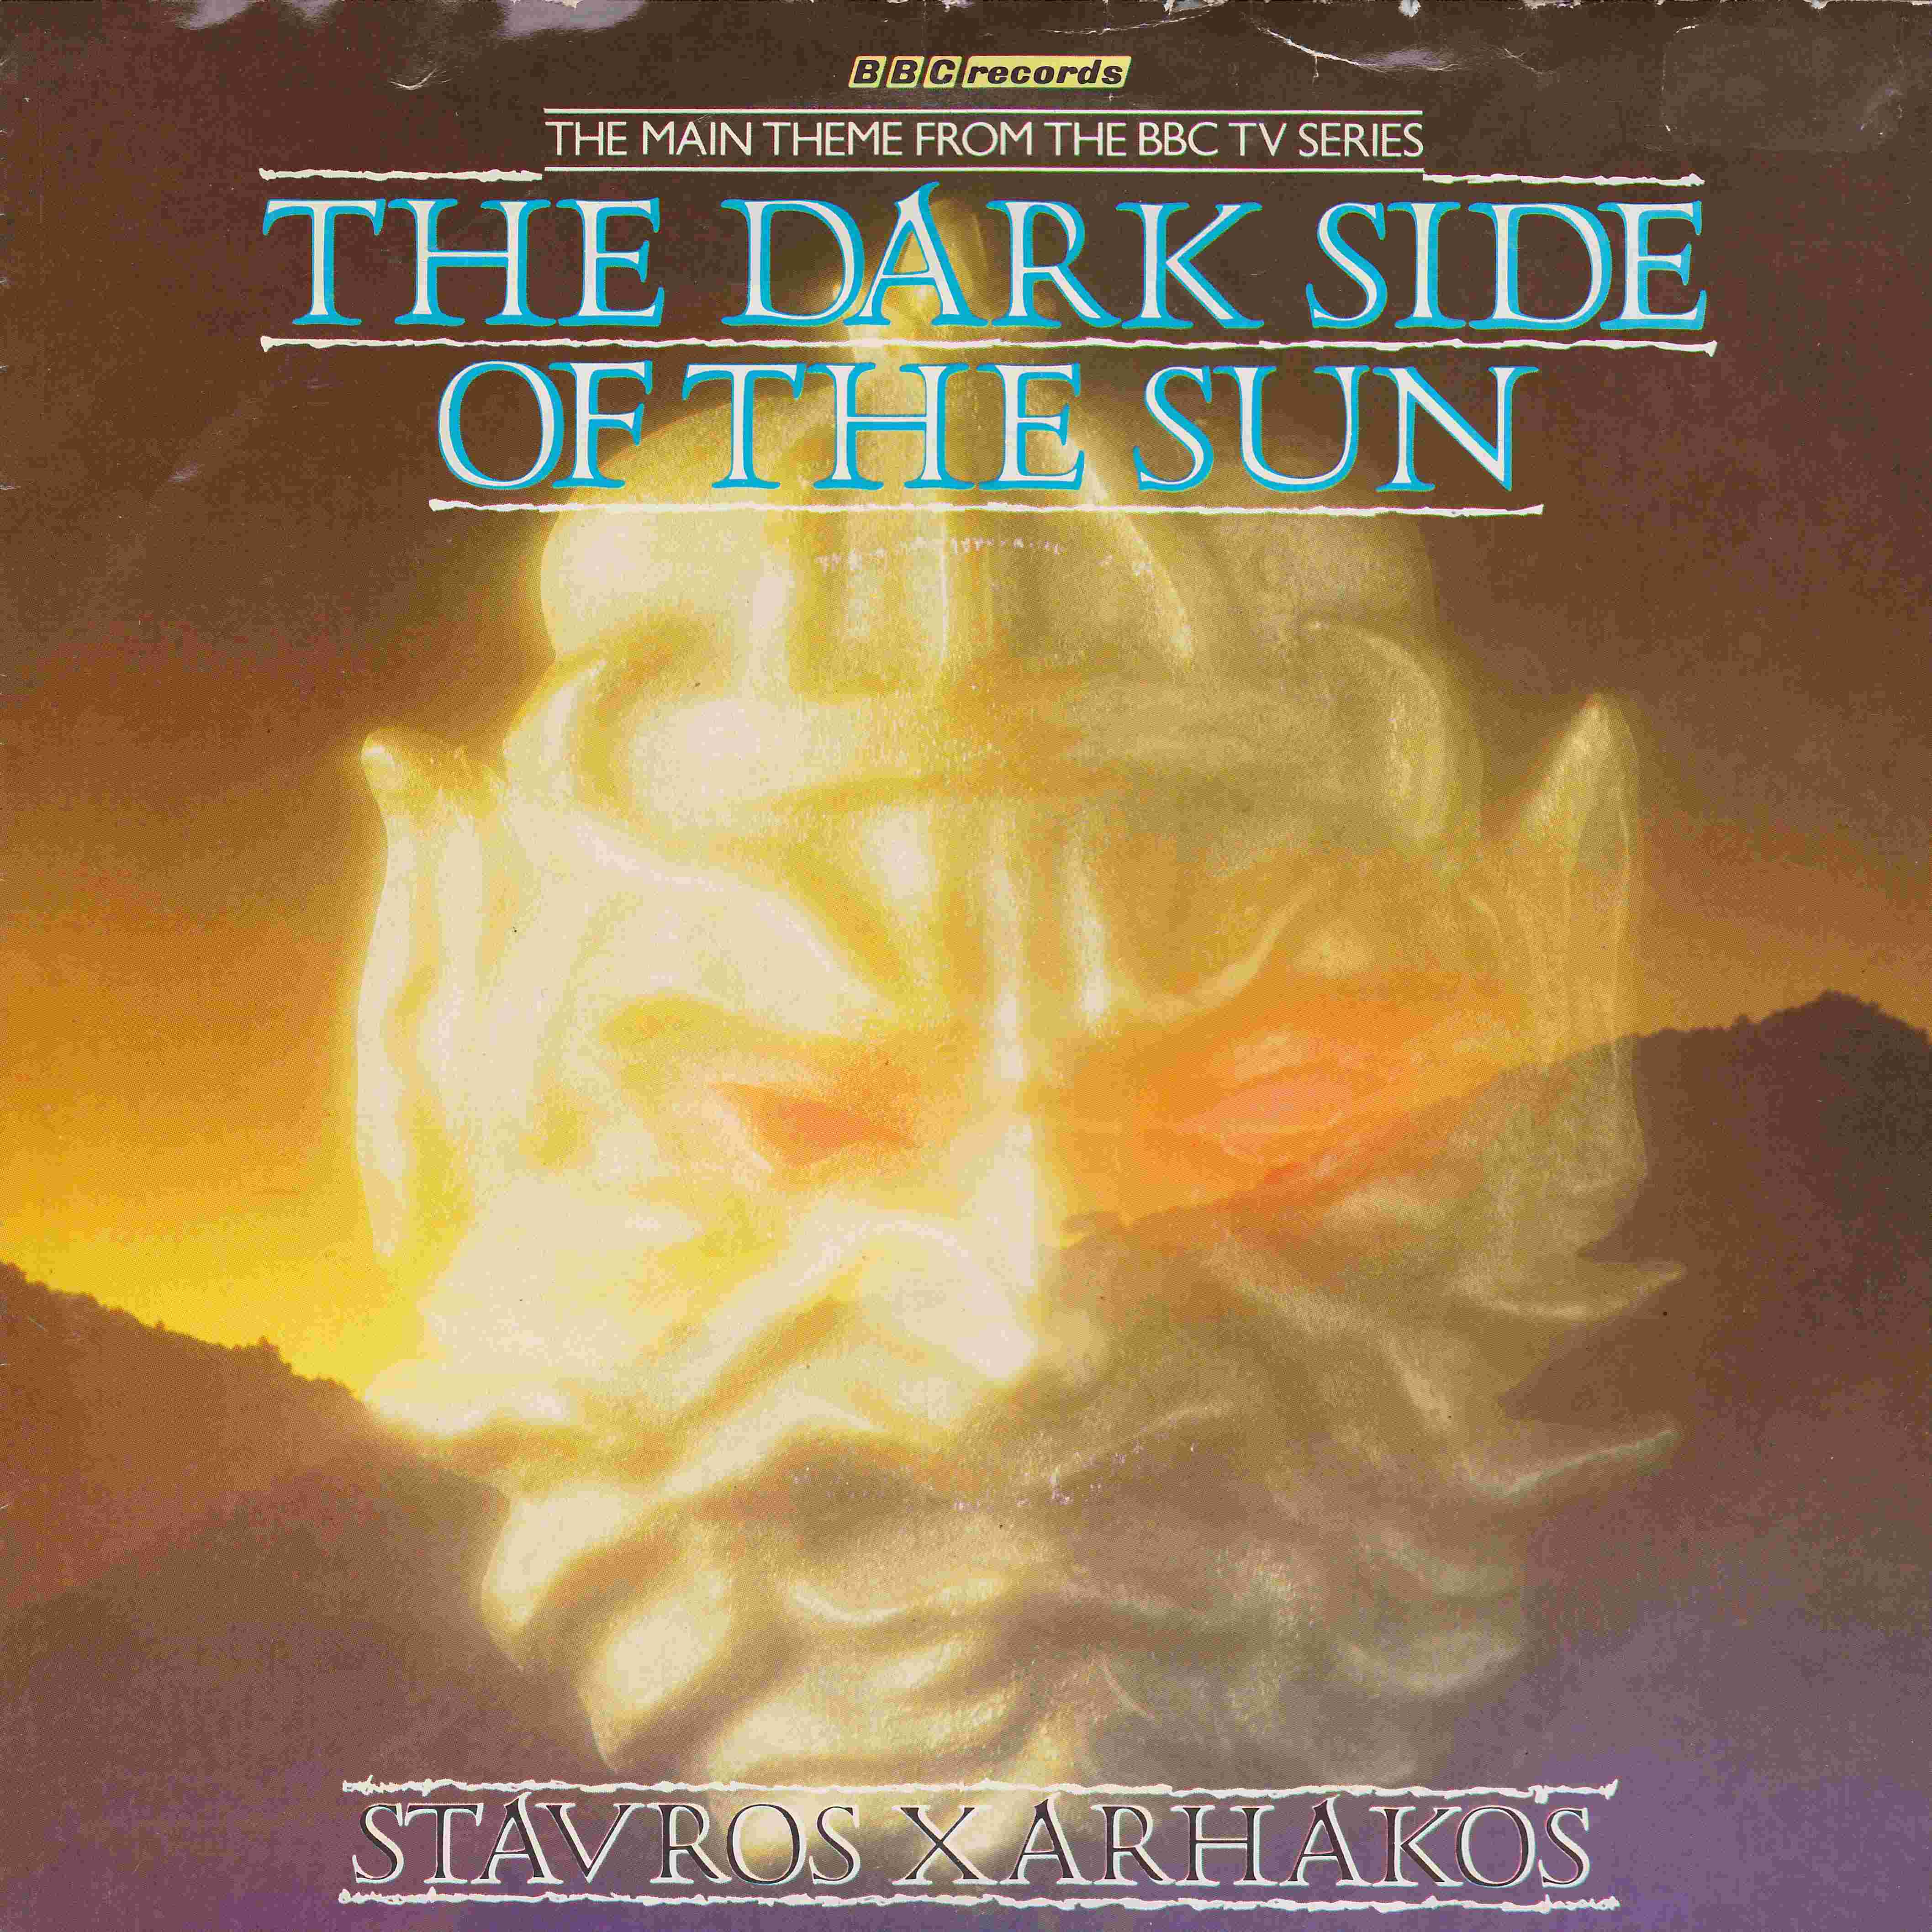 Picture of RESL 135 The dark side of the sun by artist Stavros Xarhakos from the BBC singles - Records and Tapes library